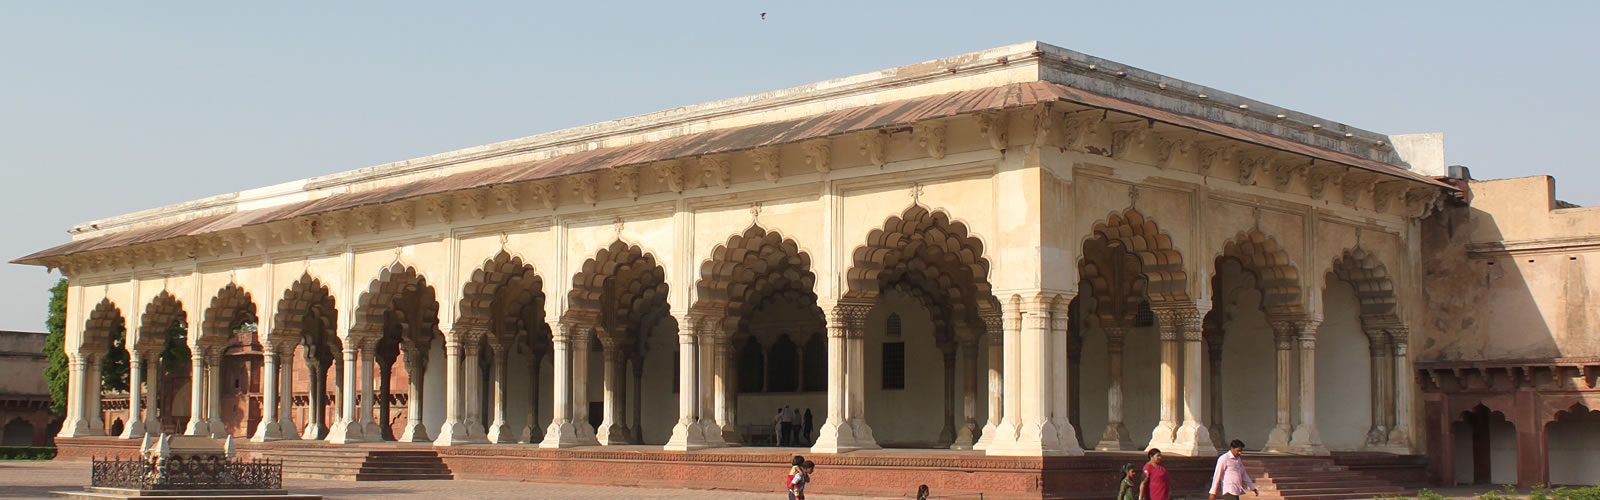 Archaeological Museum, Agra